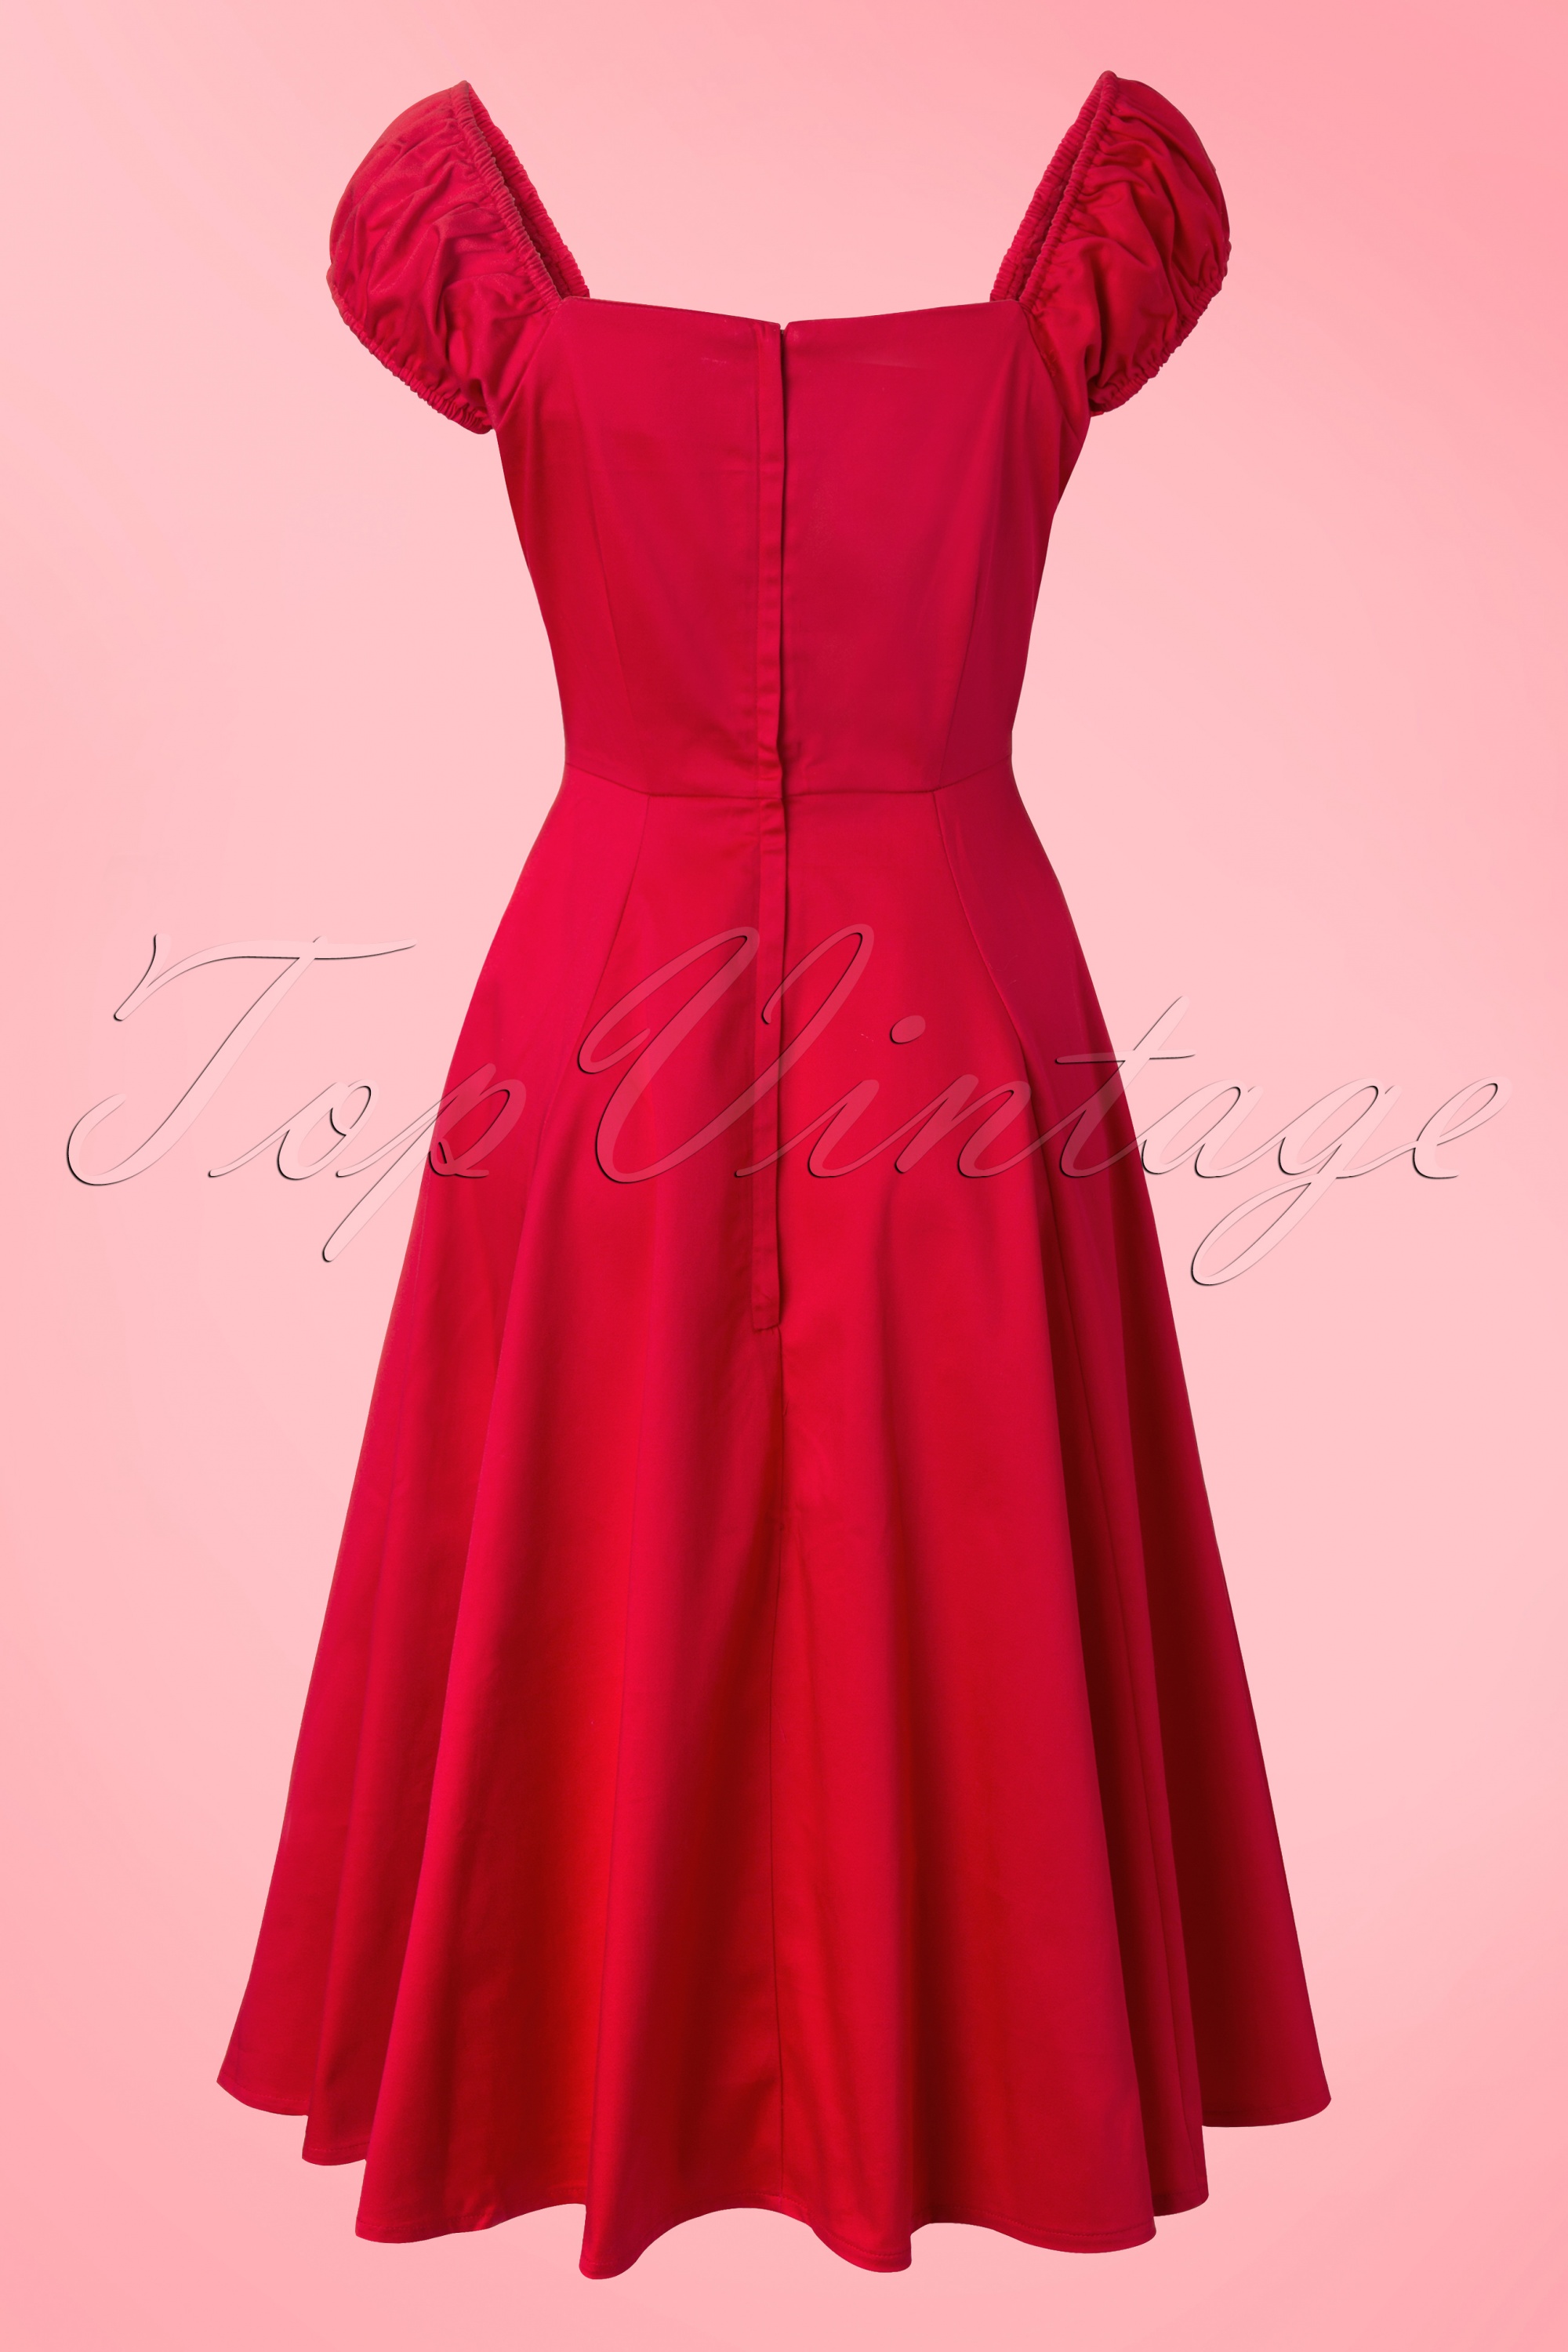 Collectif Clothing - Dolores pop-swingjurk in rood 6